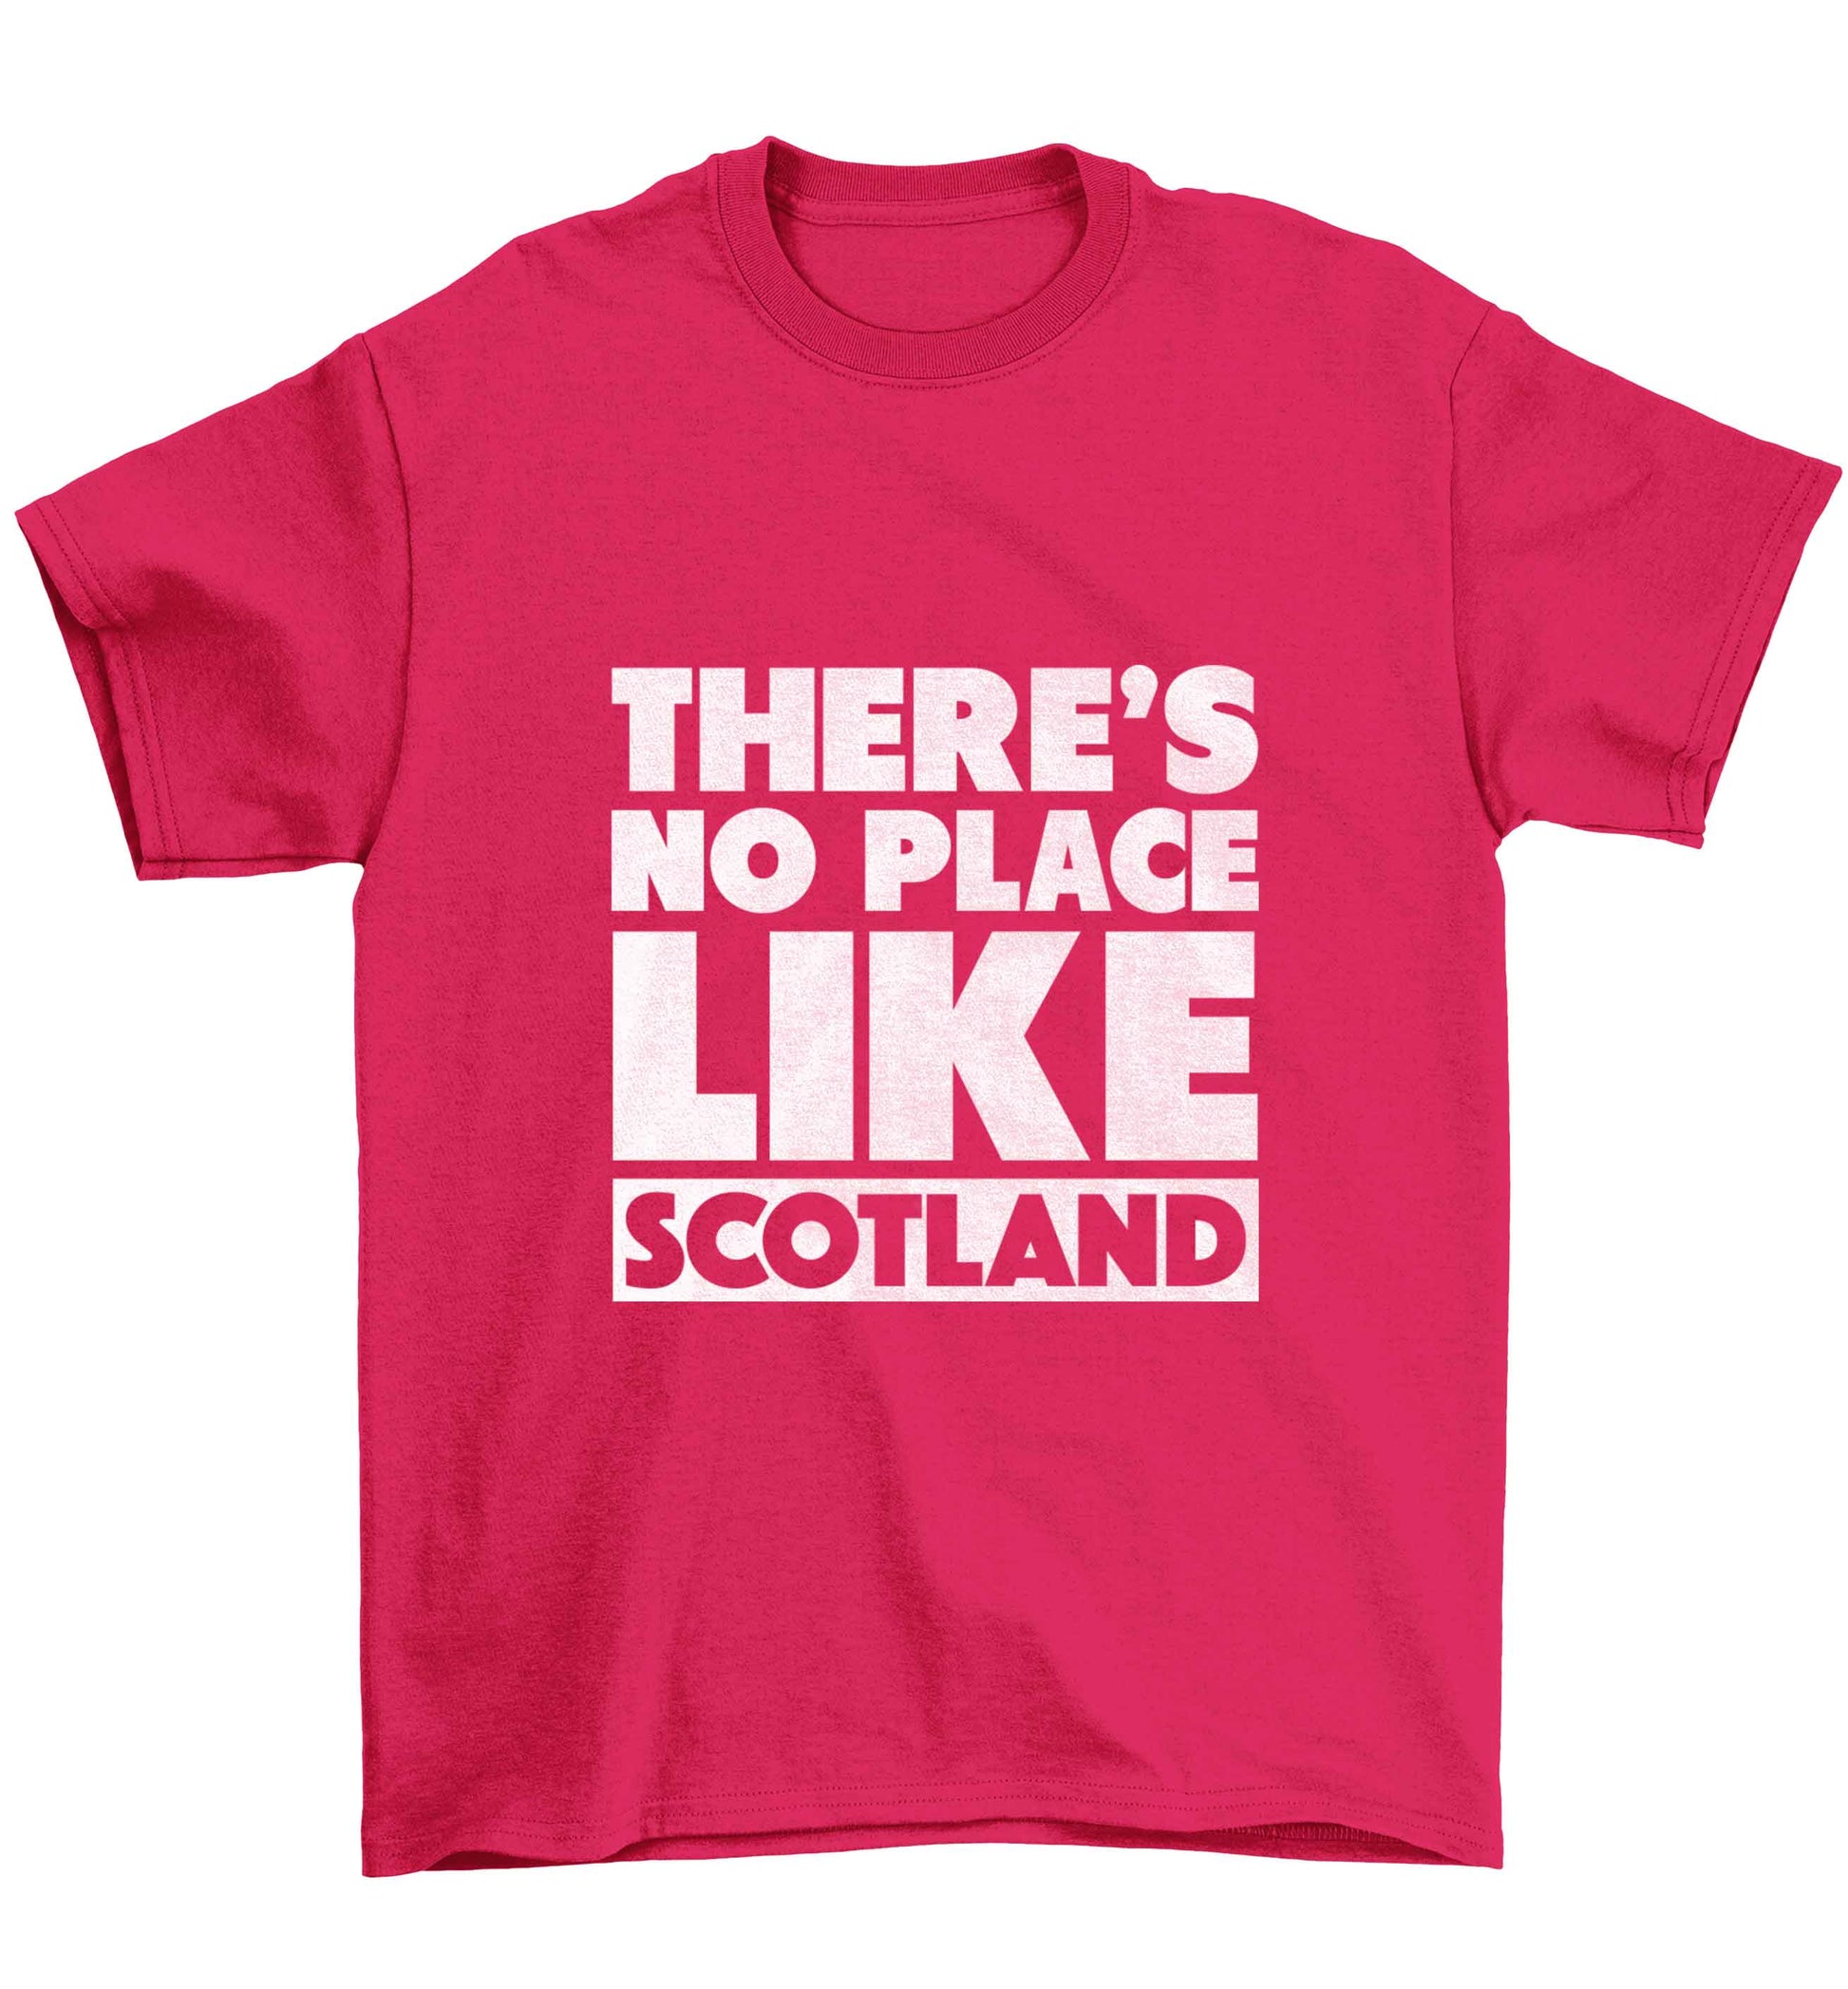 There's no place like Scotland Children's pink Tshirt 12-13 Years